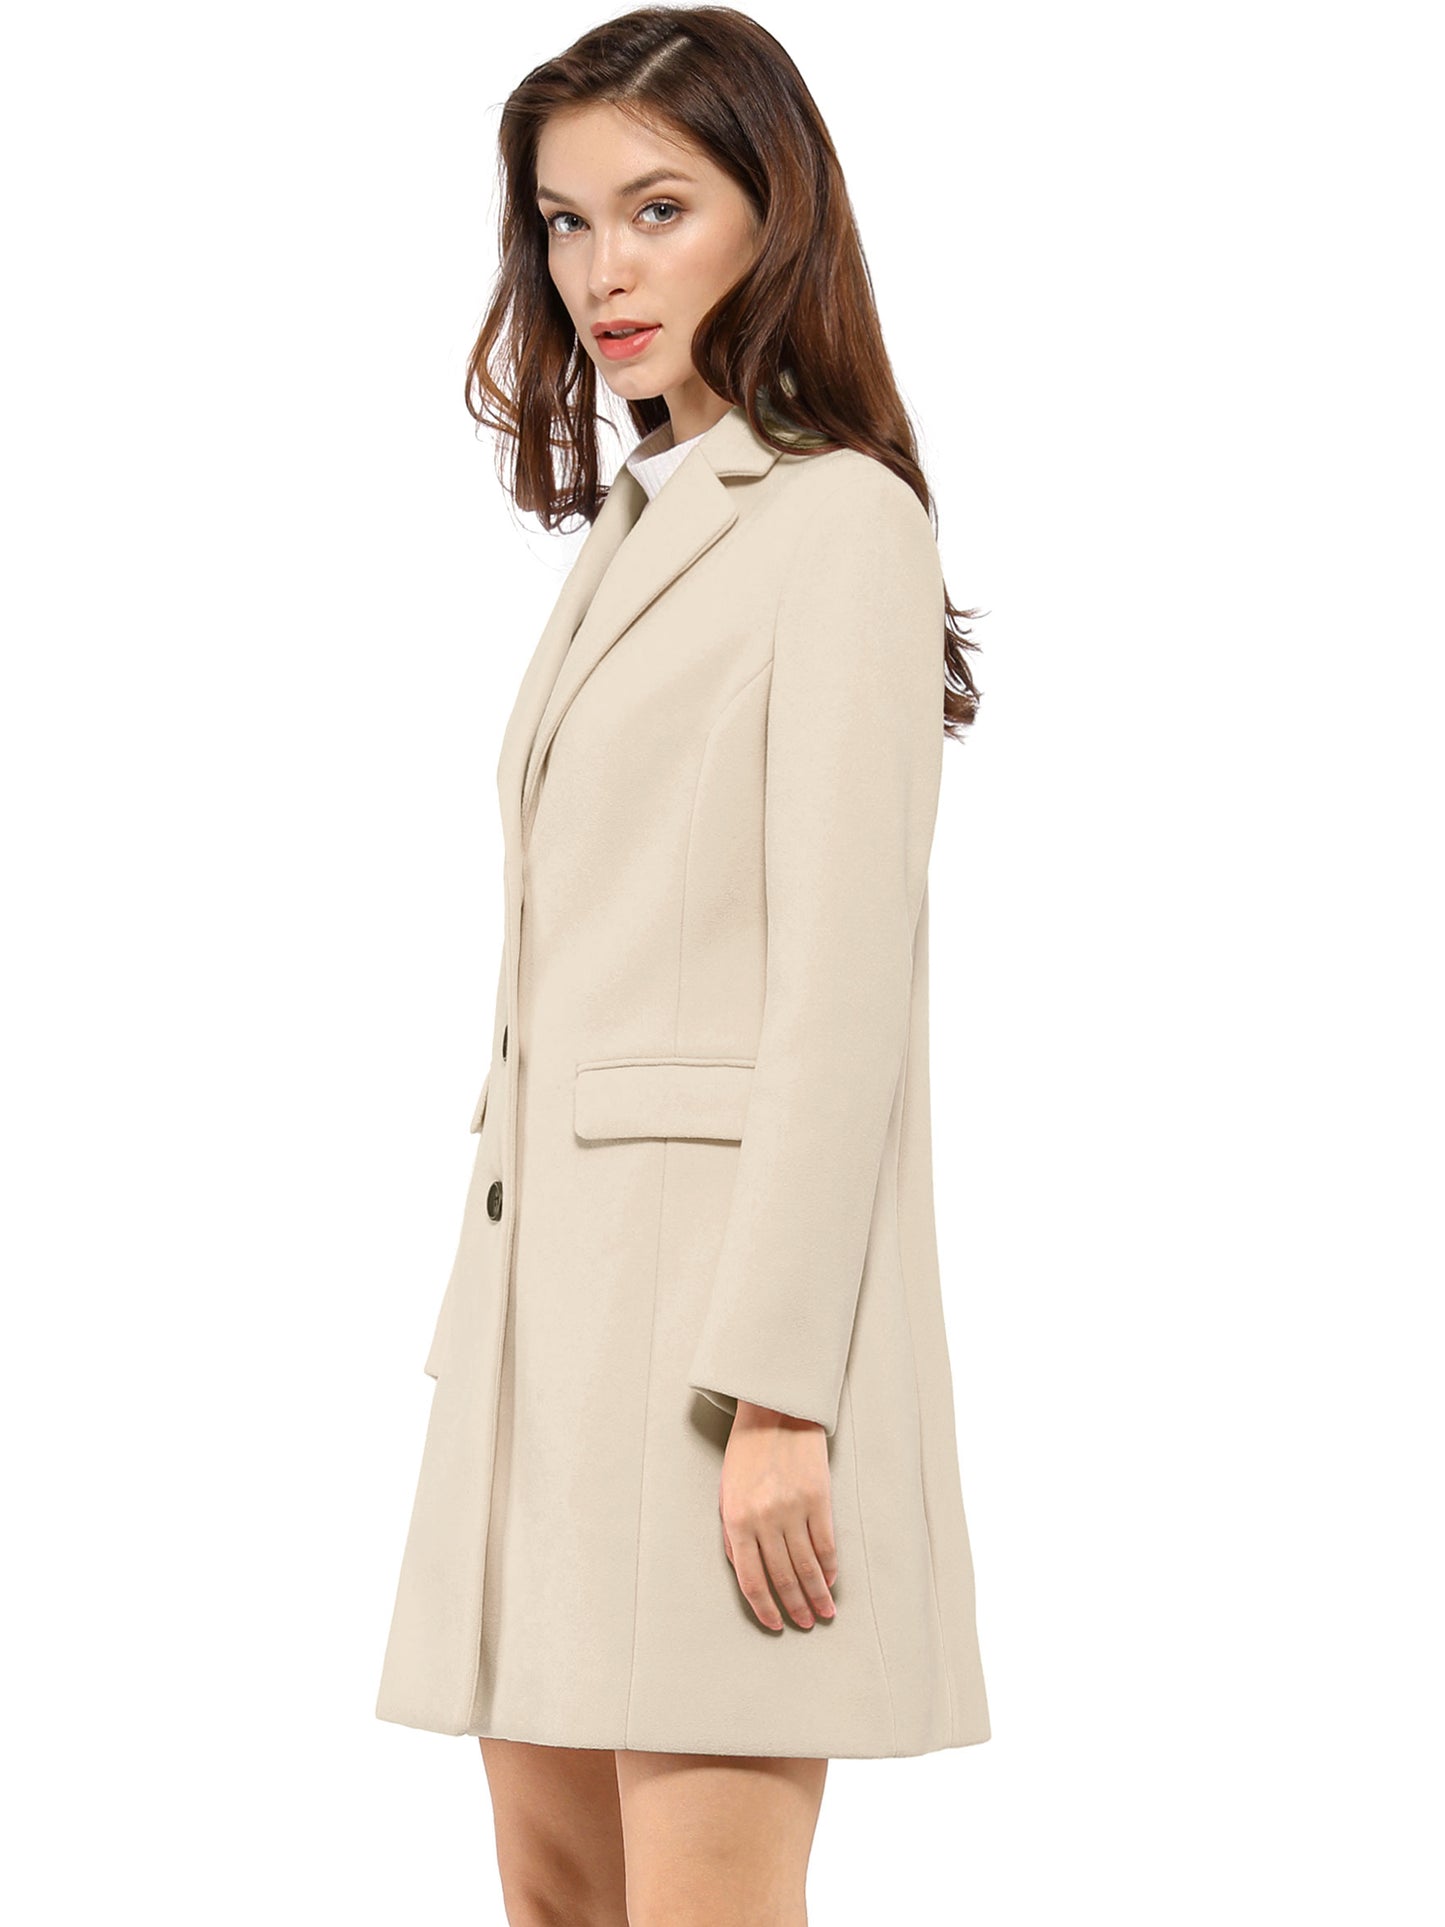 Allegra K Notched Lapel Single Breasted Outwear Winter Coat Cream White